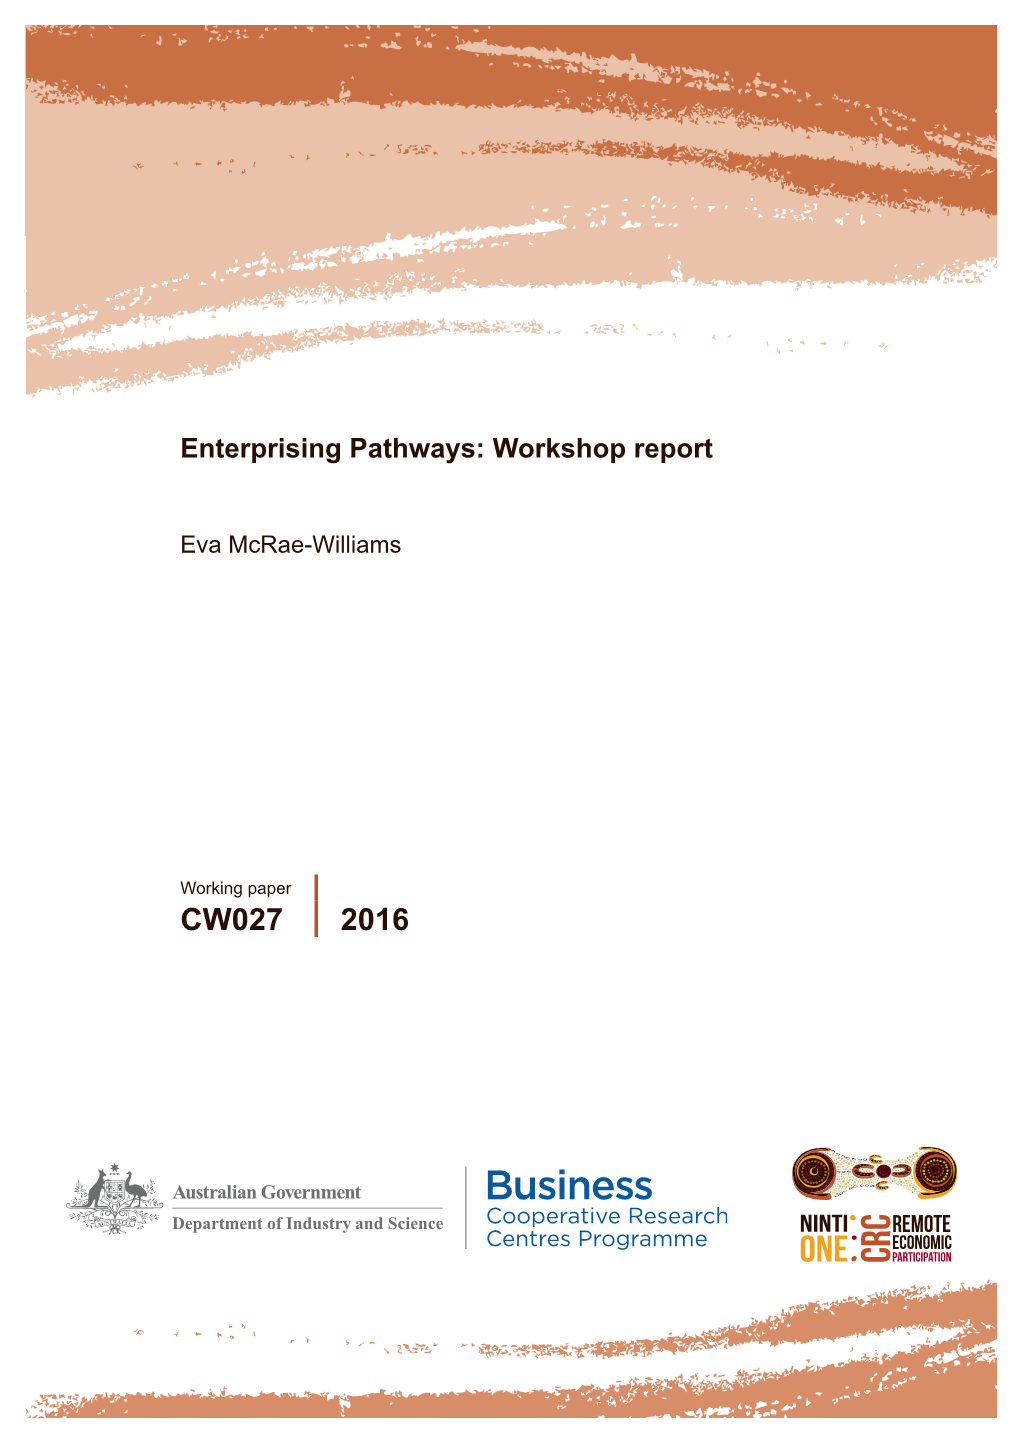 CW027 2016 Cooperative Research Centre for Remote Economic Participation Working Paper CW027